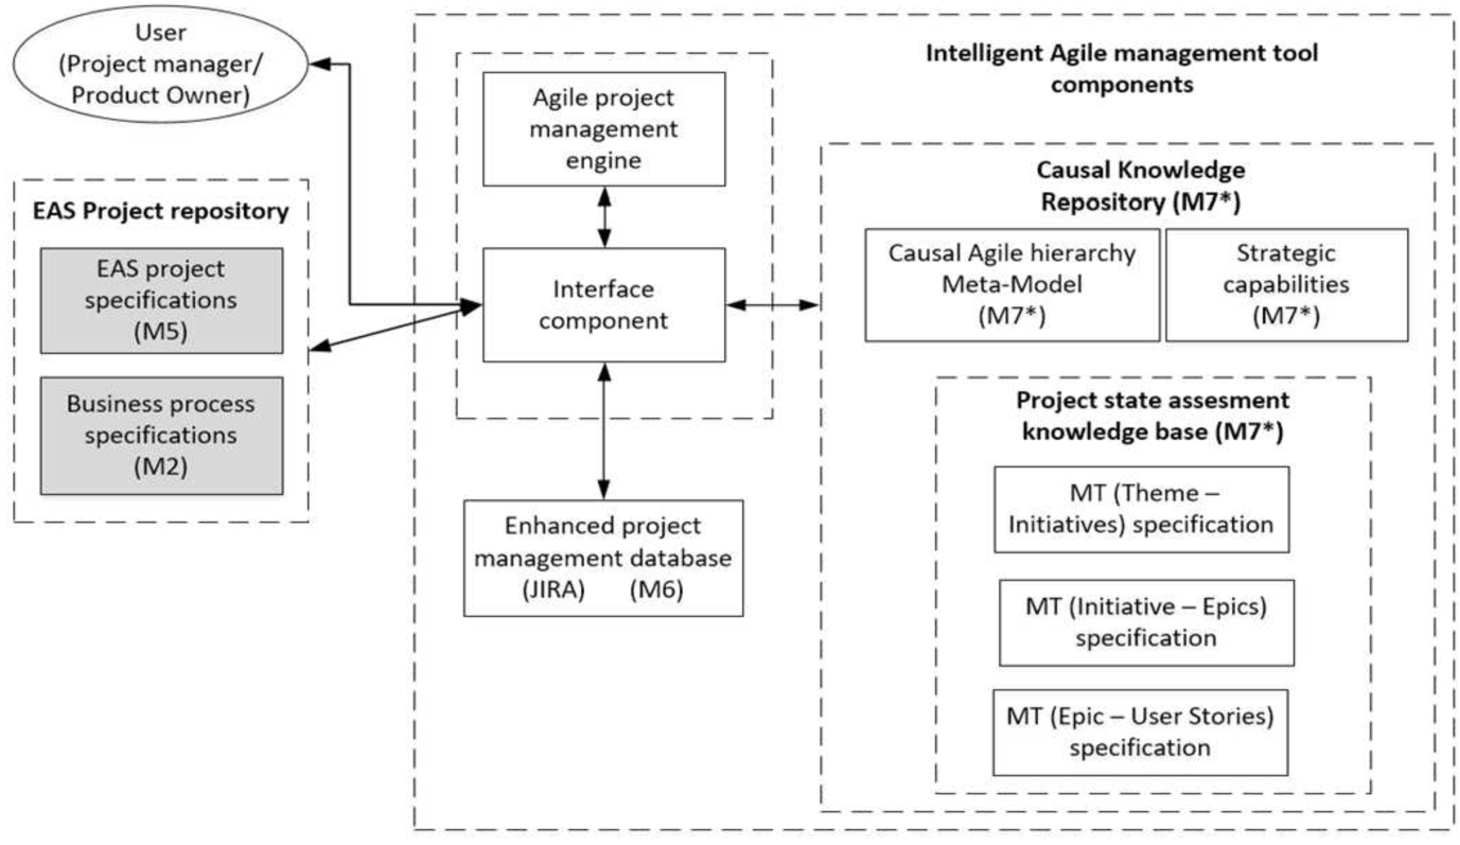 Enhanced Agile project management tool architecture.